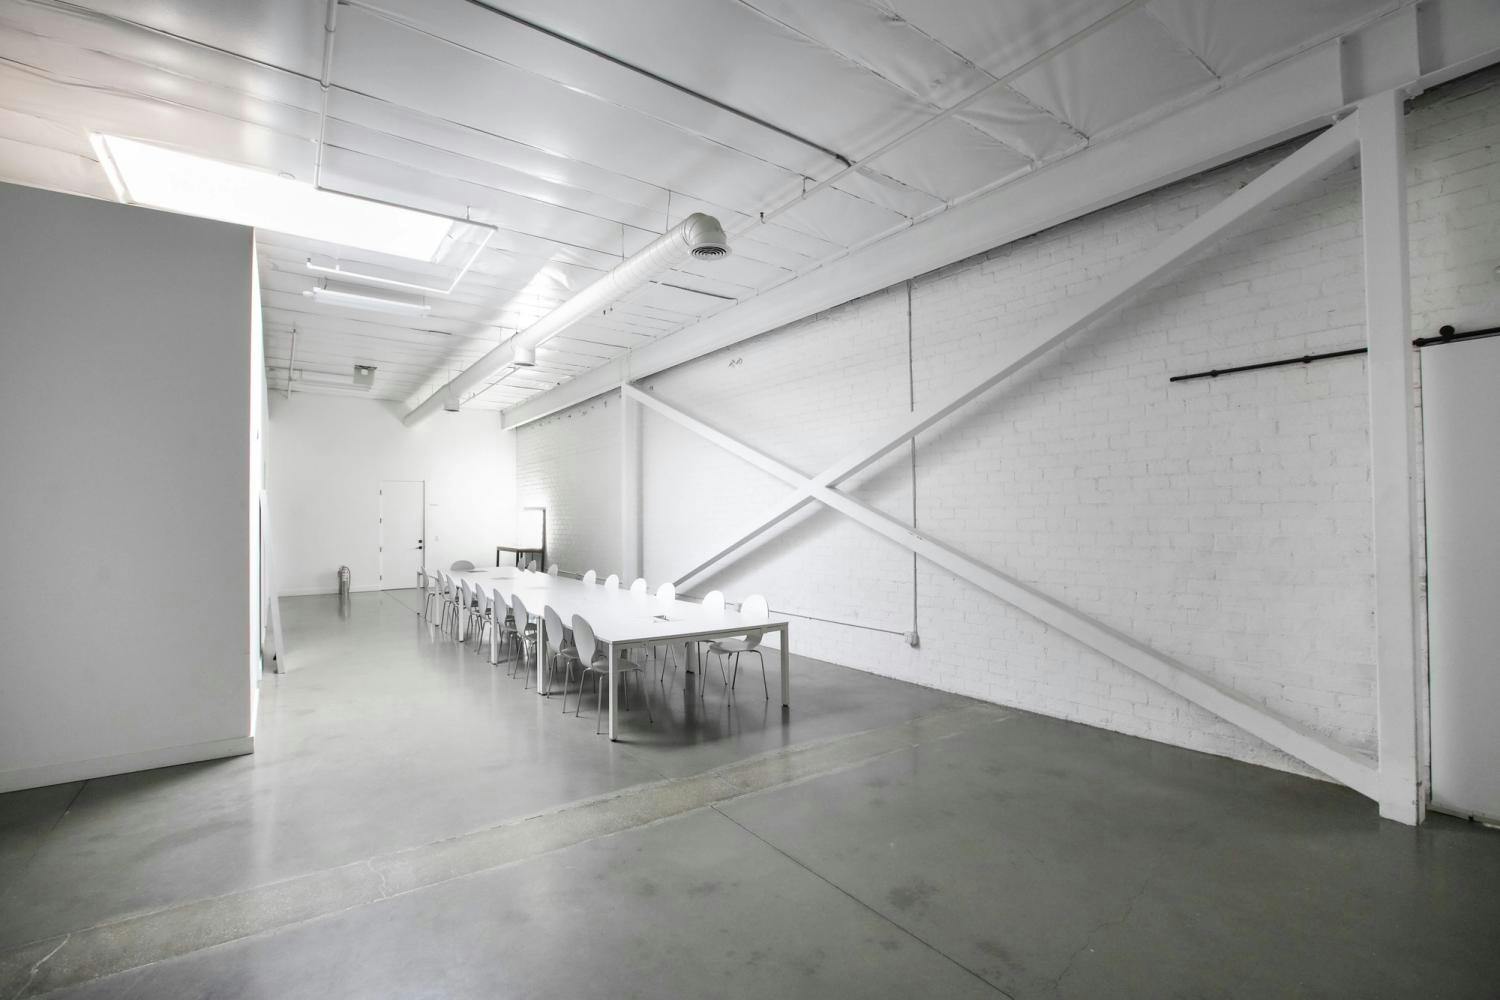 A bright, minimalist room featuring a meeting area with a long white table and chairs, white brick walls, and a polished concrete floor, illuminated by natural light and overhead fluorescent lights.